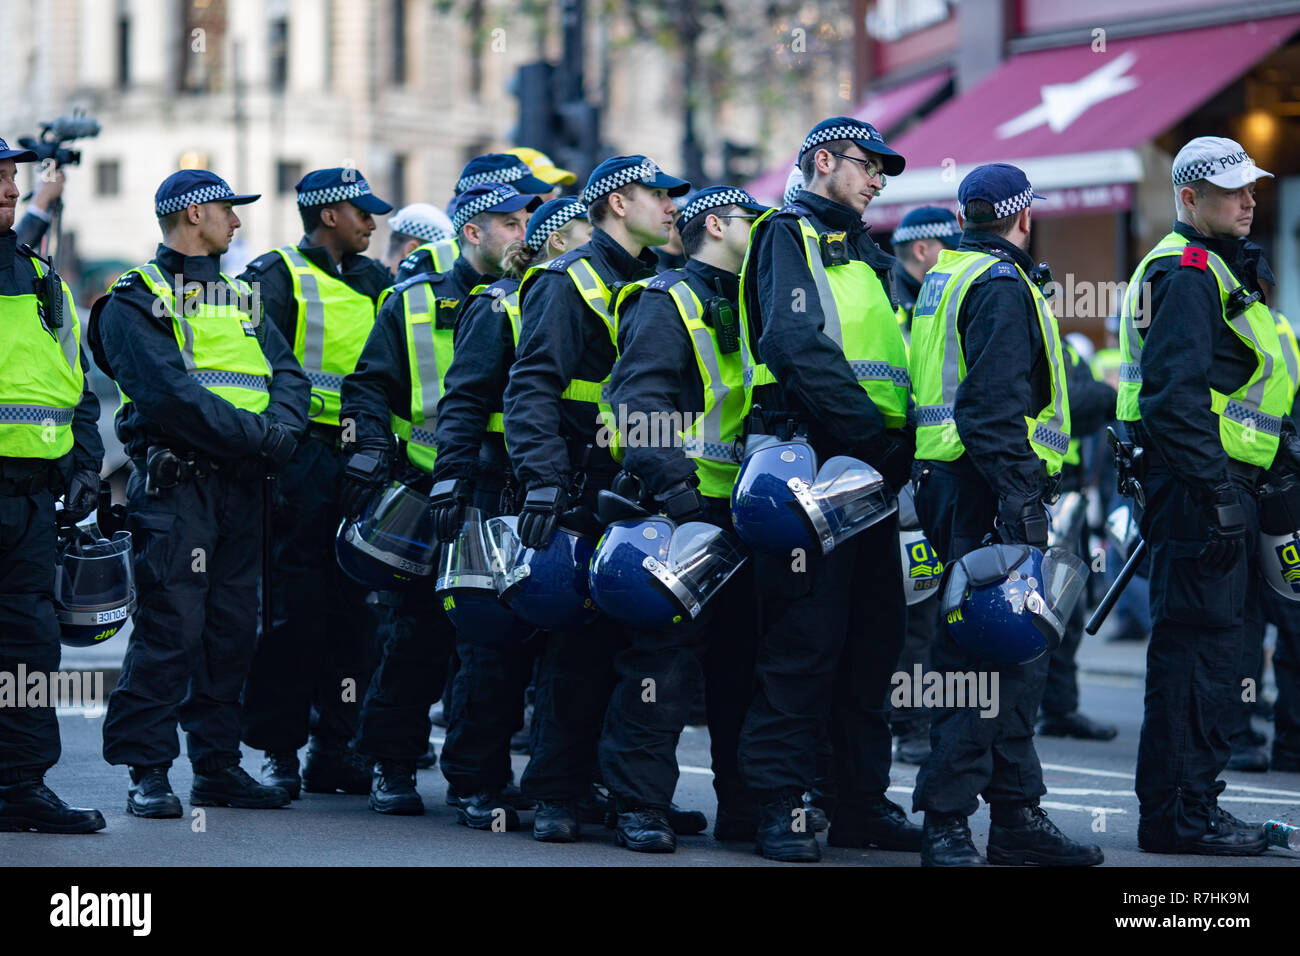 Police huddle close as the demonstrations draw to a close.   3,000 Pro-Brexit demonstrators and 15,000 Anti-Facist counter demonstrators took to the streets of London to voice their stance on the deal ahead of the key Brexit vote in parliament this Tuesday. Stock Photo